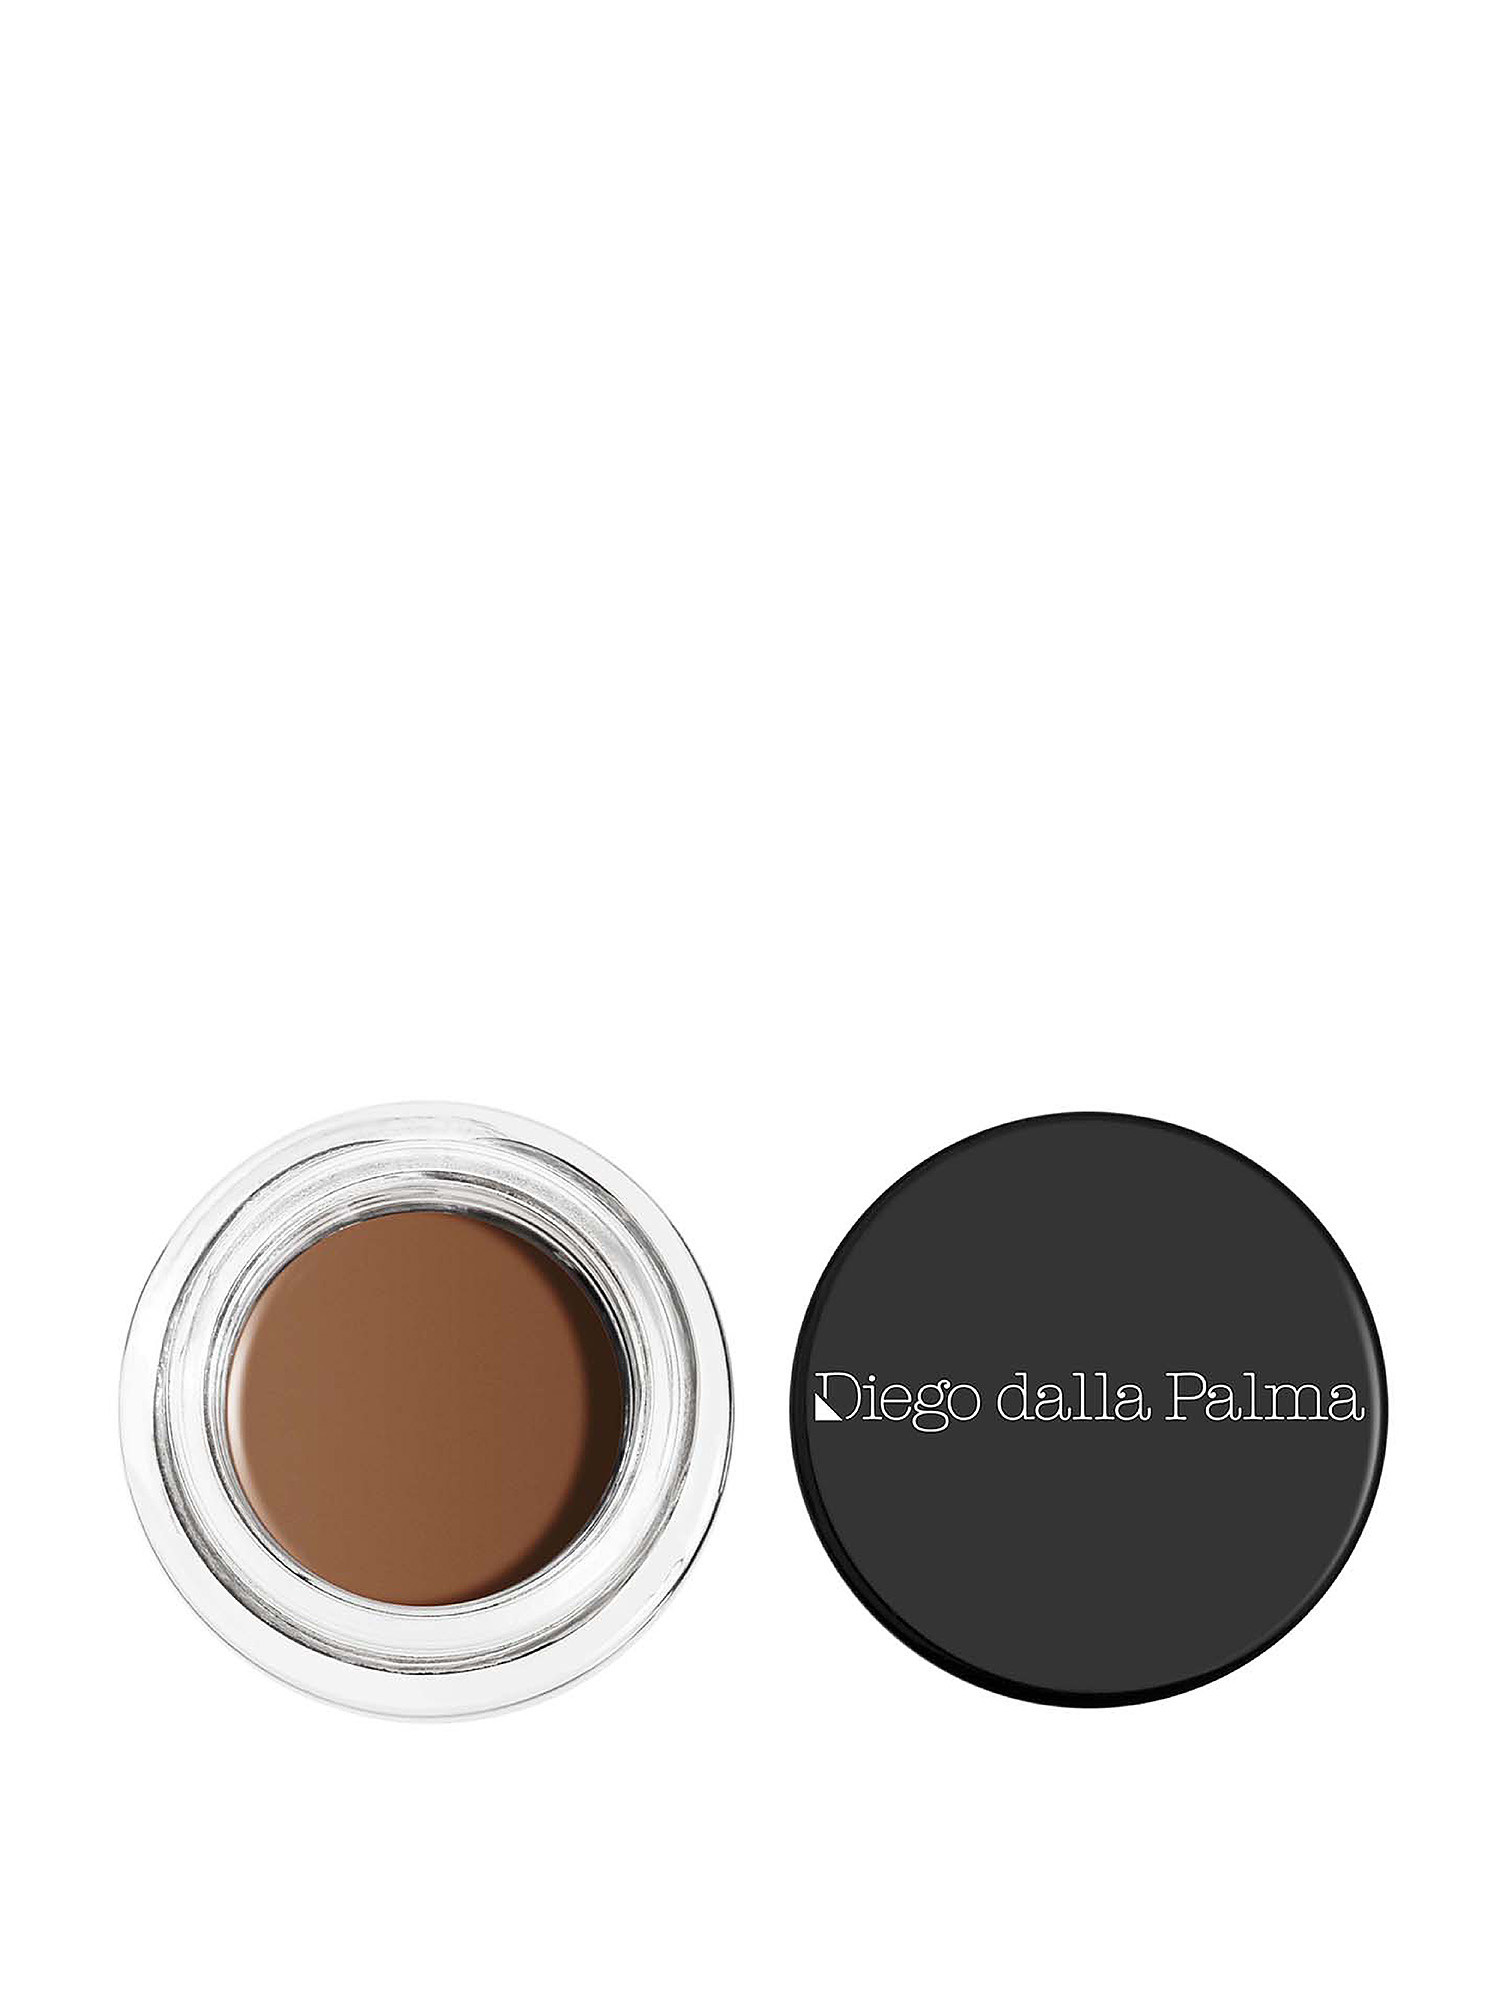 Waterproof Eyebrow Liner Cream - 02 warm taupe, Taupe Grey, large image number 0